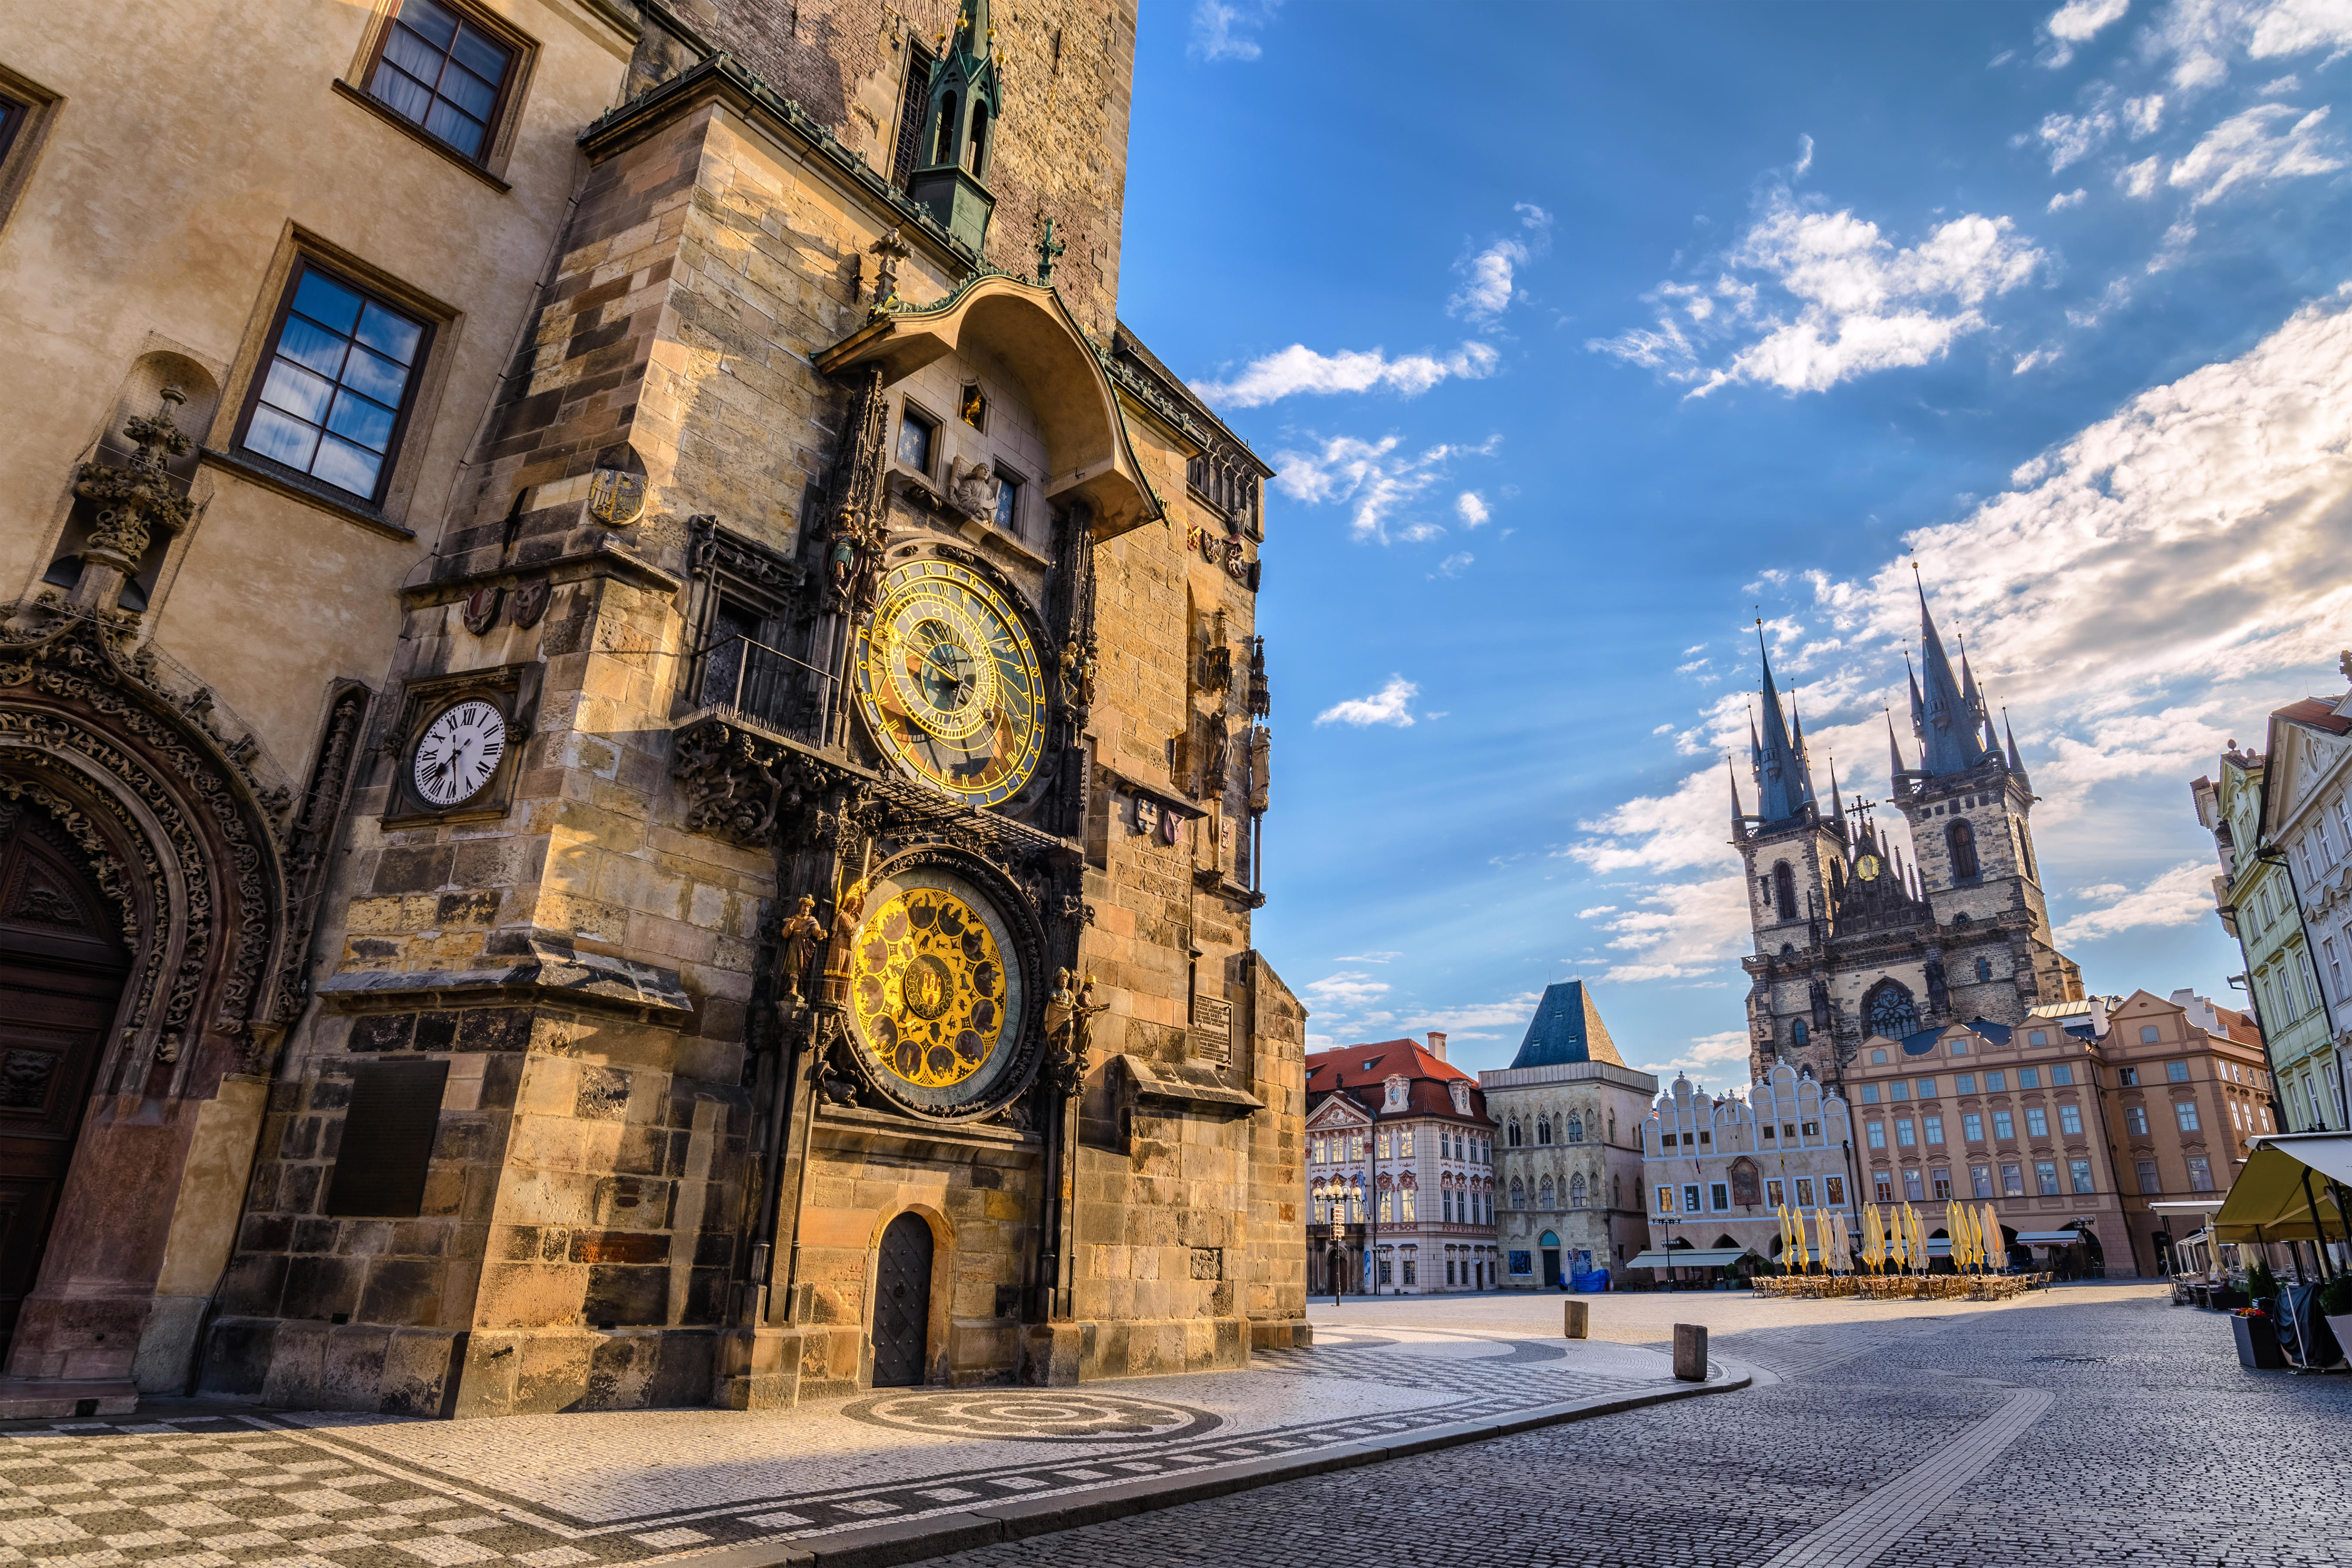 See the unique structure of Astronomical Clock Tower